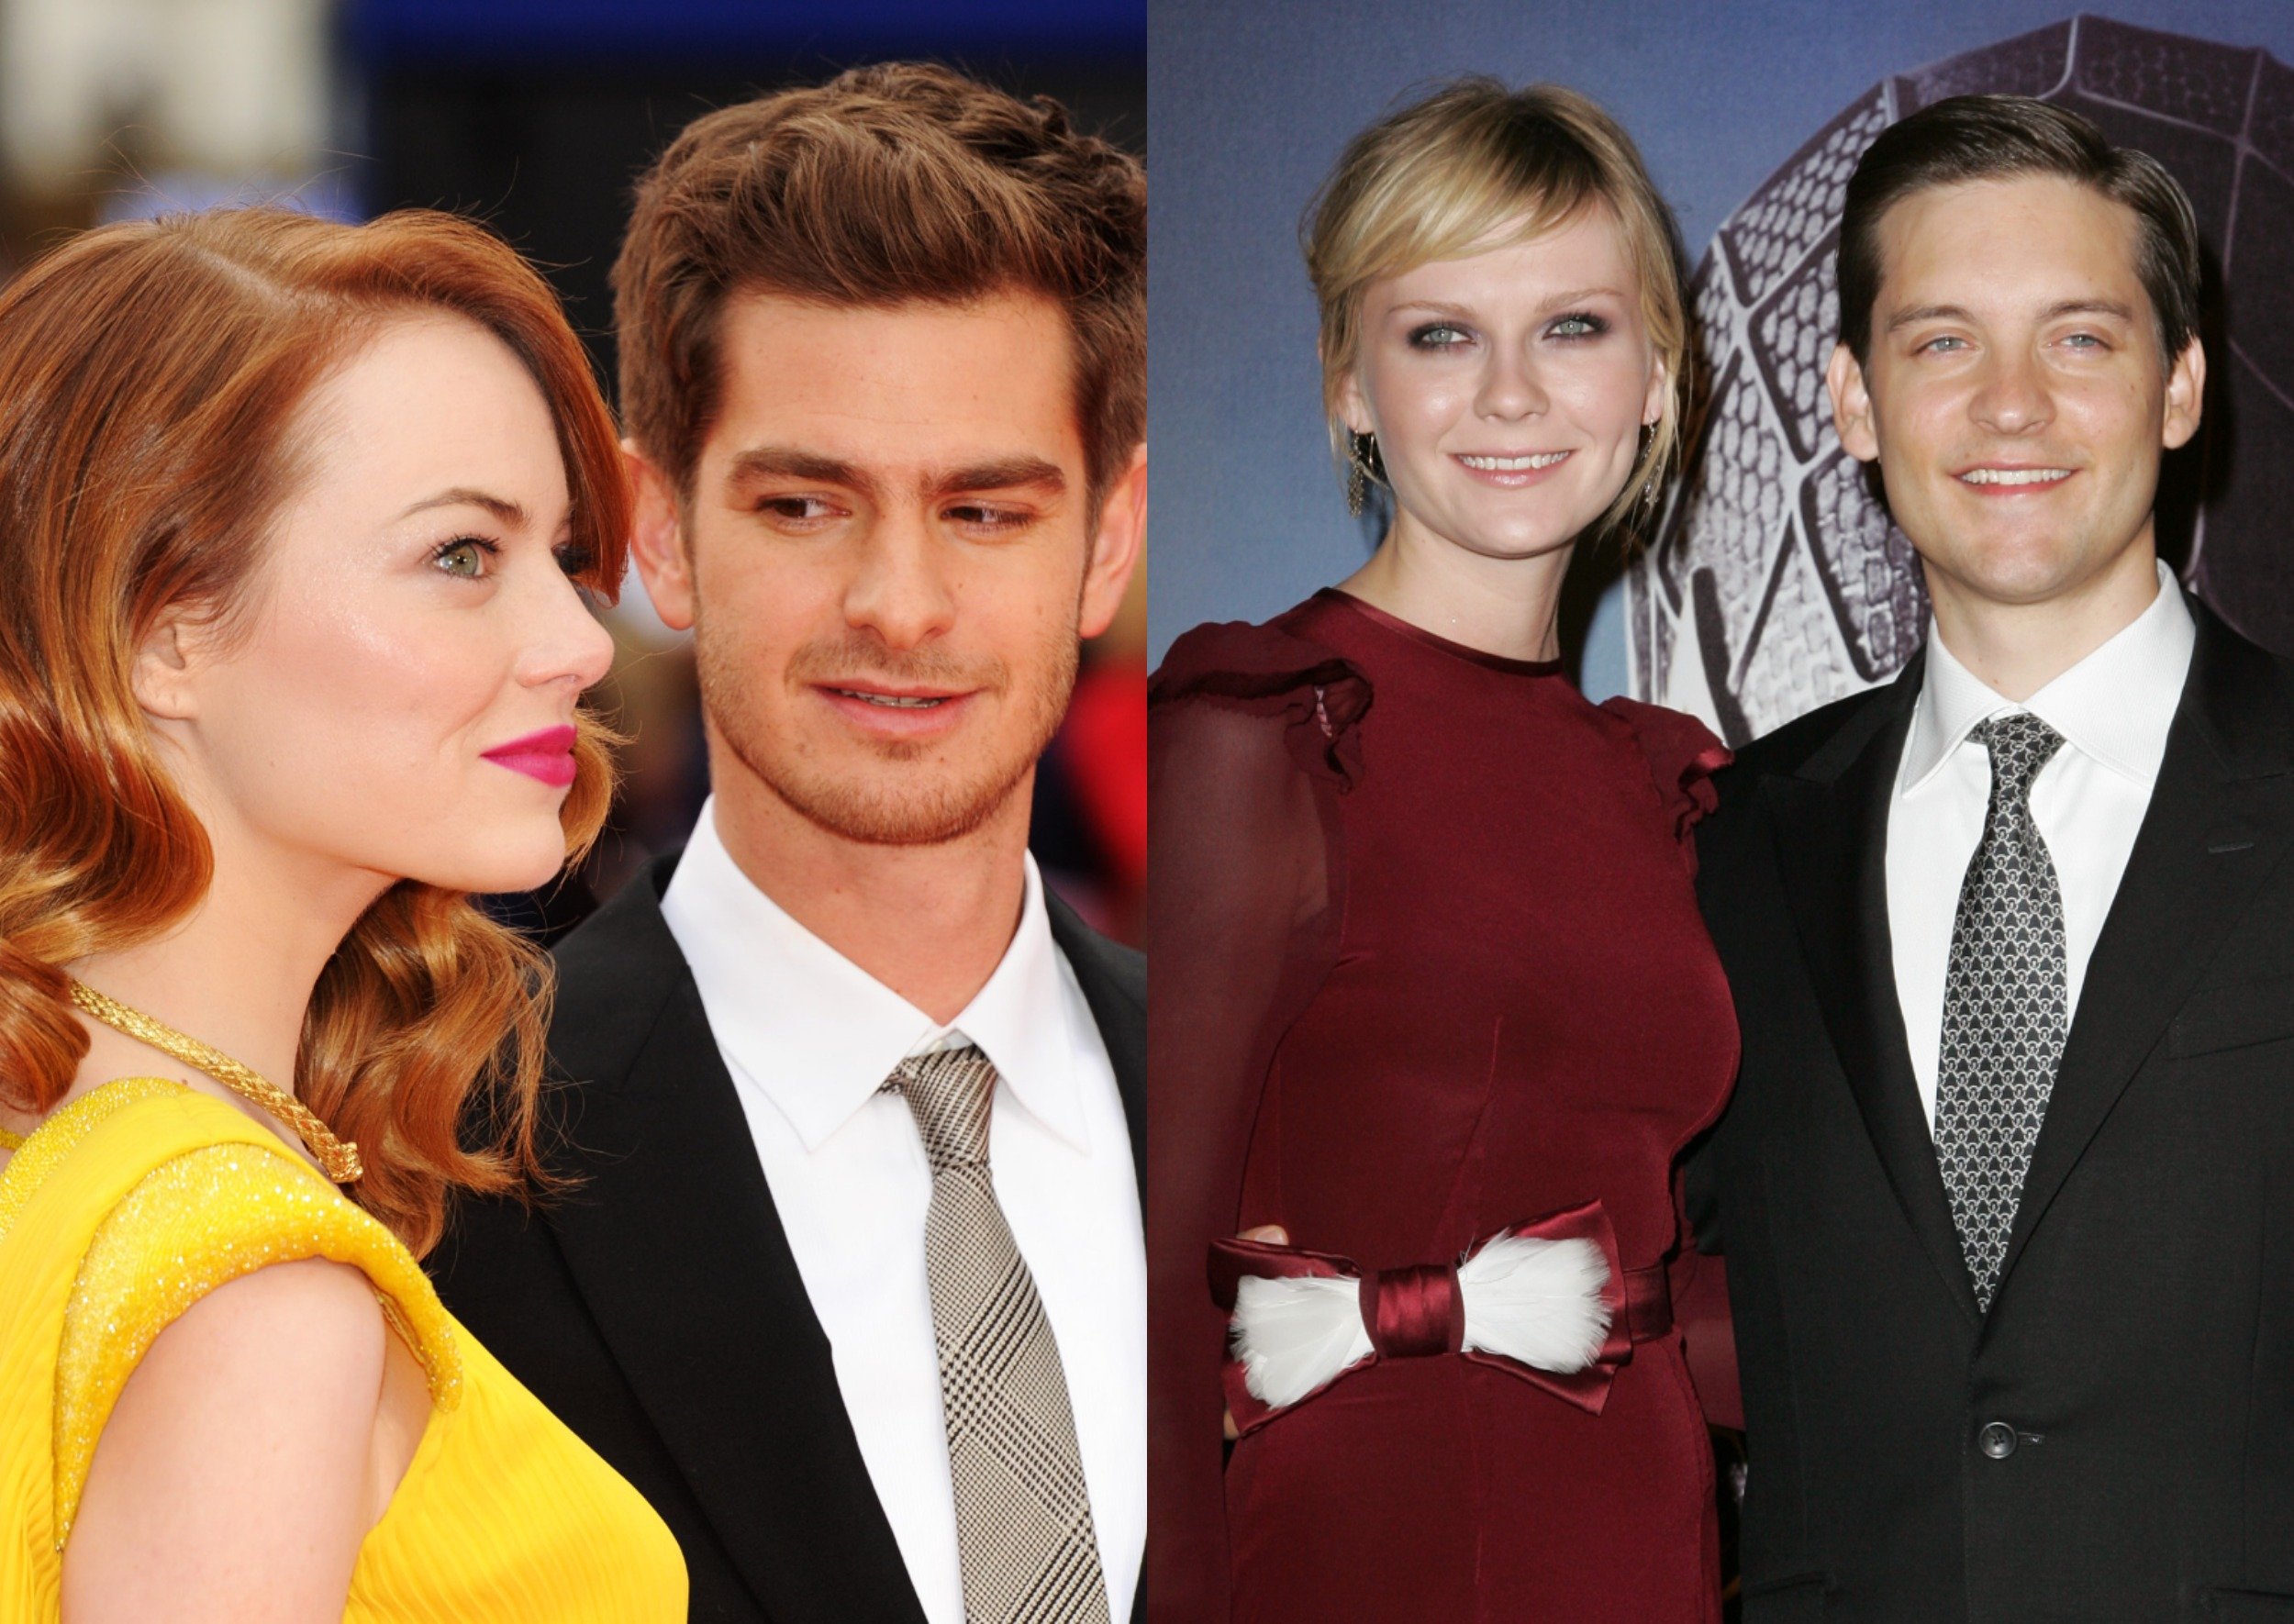 Righthand photo shows Emma Stone and Andrew Garfield in formal attire on the red carpet. Lefthand photo shows Tobey Maguire and Kirsten Dunst in formal wear in front of a 'Spider-Man' wall